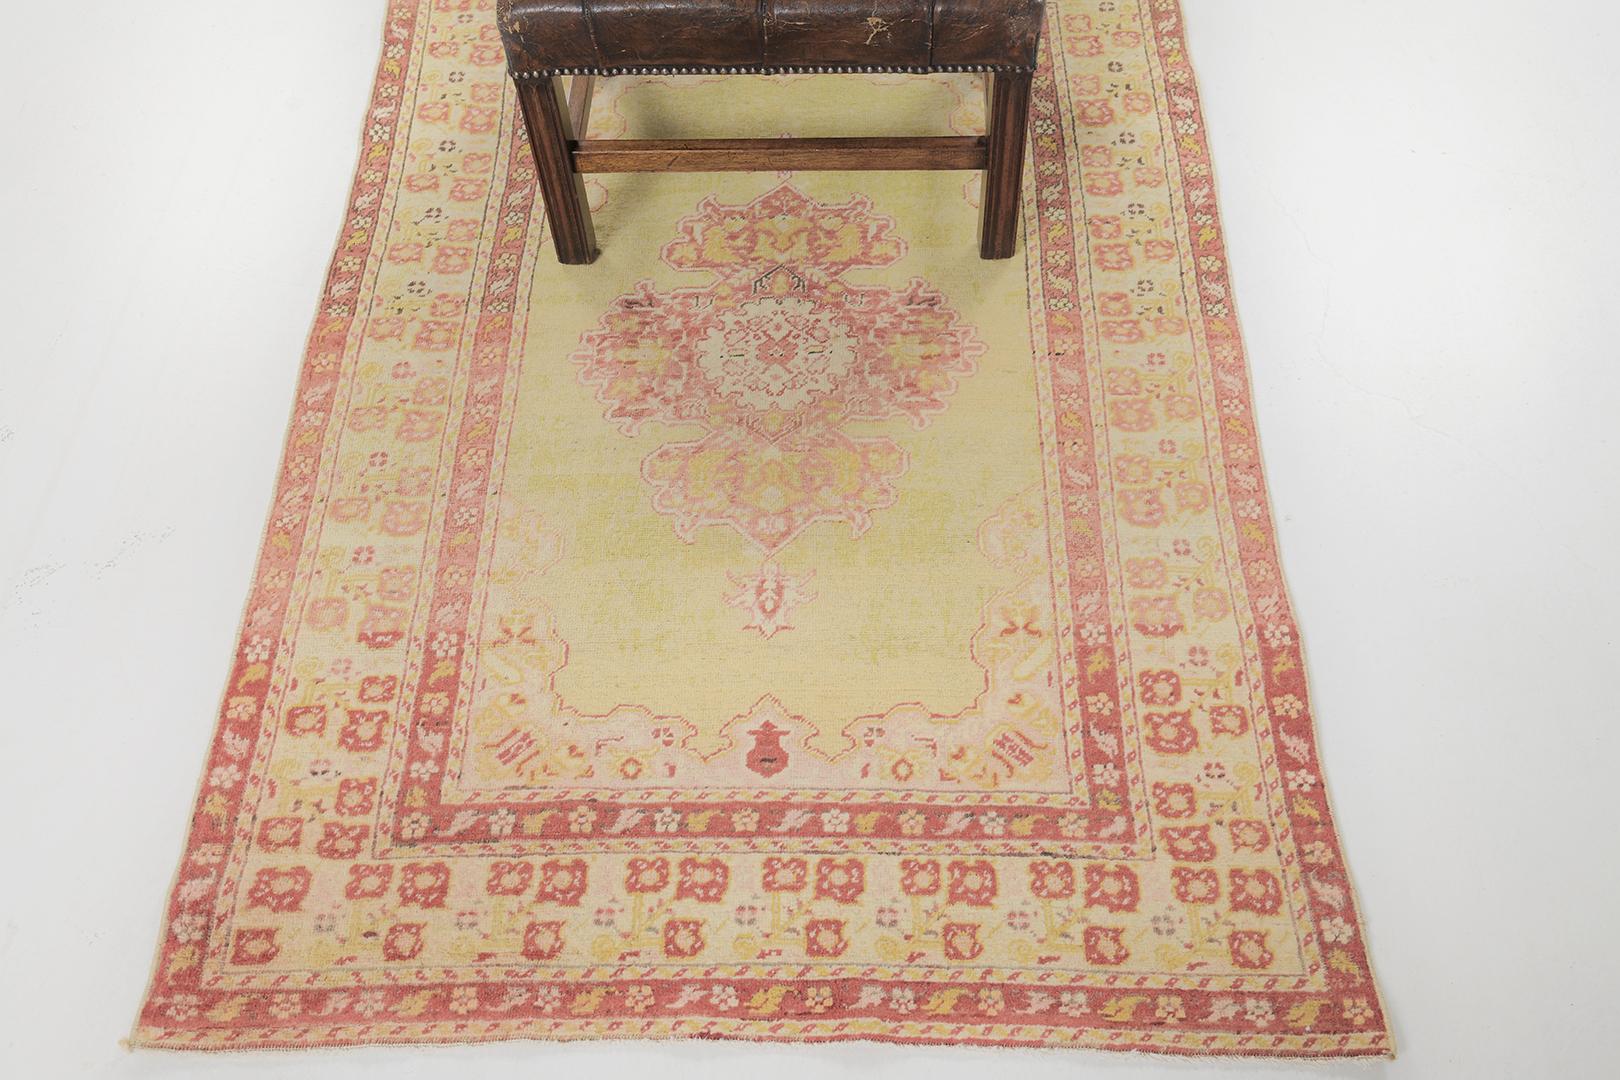 Yuntdag is a red and gold vintage Turkish rug that can modify your space into a luxury. A central medallion is well complemented with the ornate borders of this masterpiece. Adding this up to your collection will surely be a great hit to the eyes of